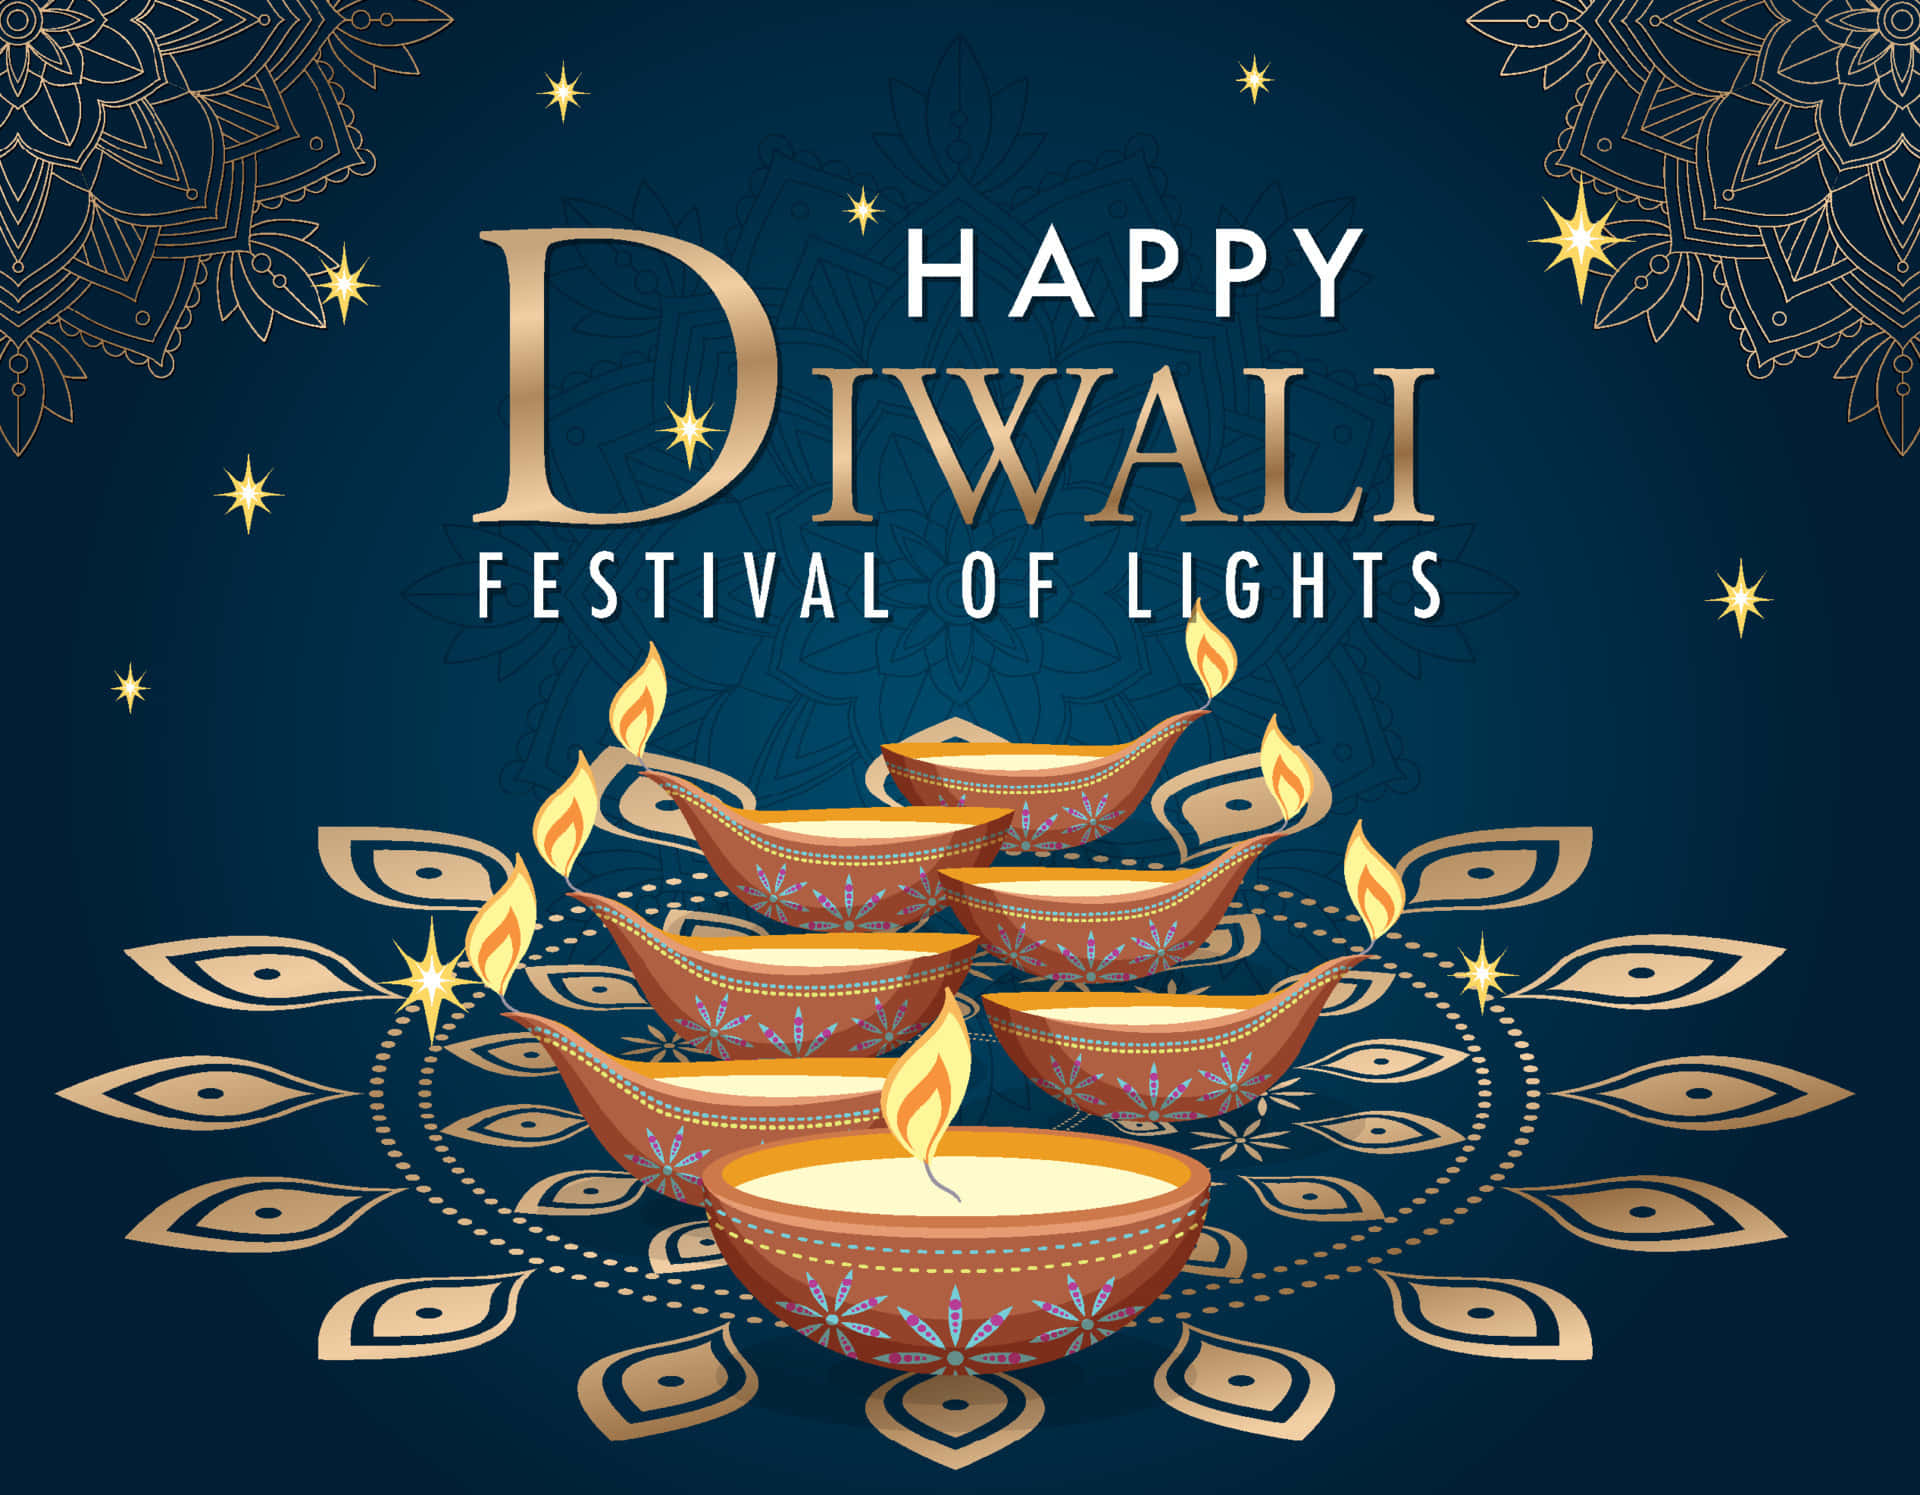 Happy Diwali Festival Of Lights With Candles